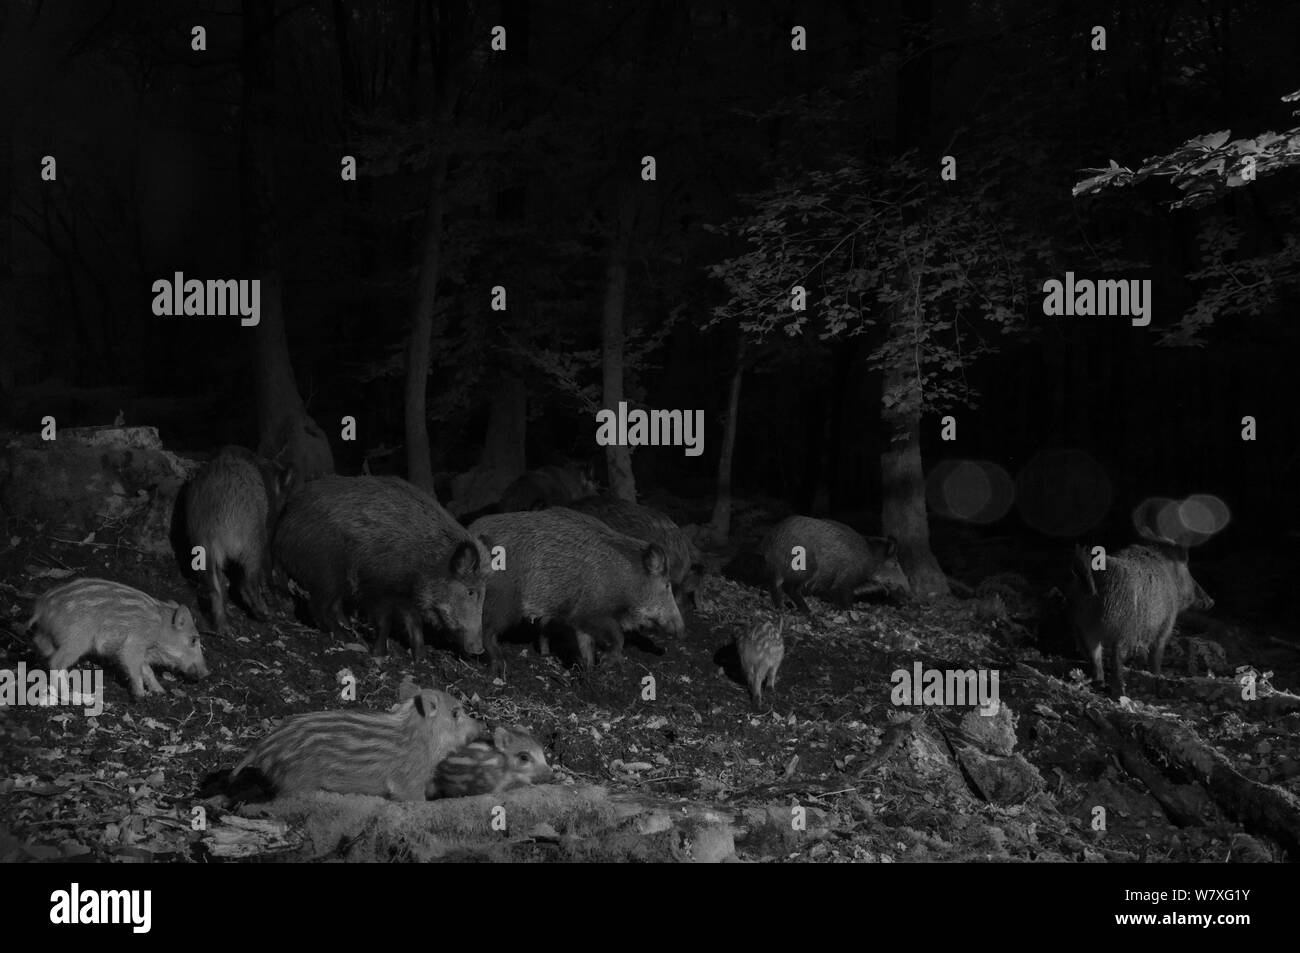 Wild boar (Sus scrofa) in forest, taken at night with infra-red remote camera trap, Mayenne, France, October. Stock Photo